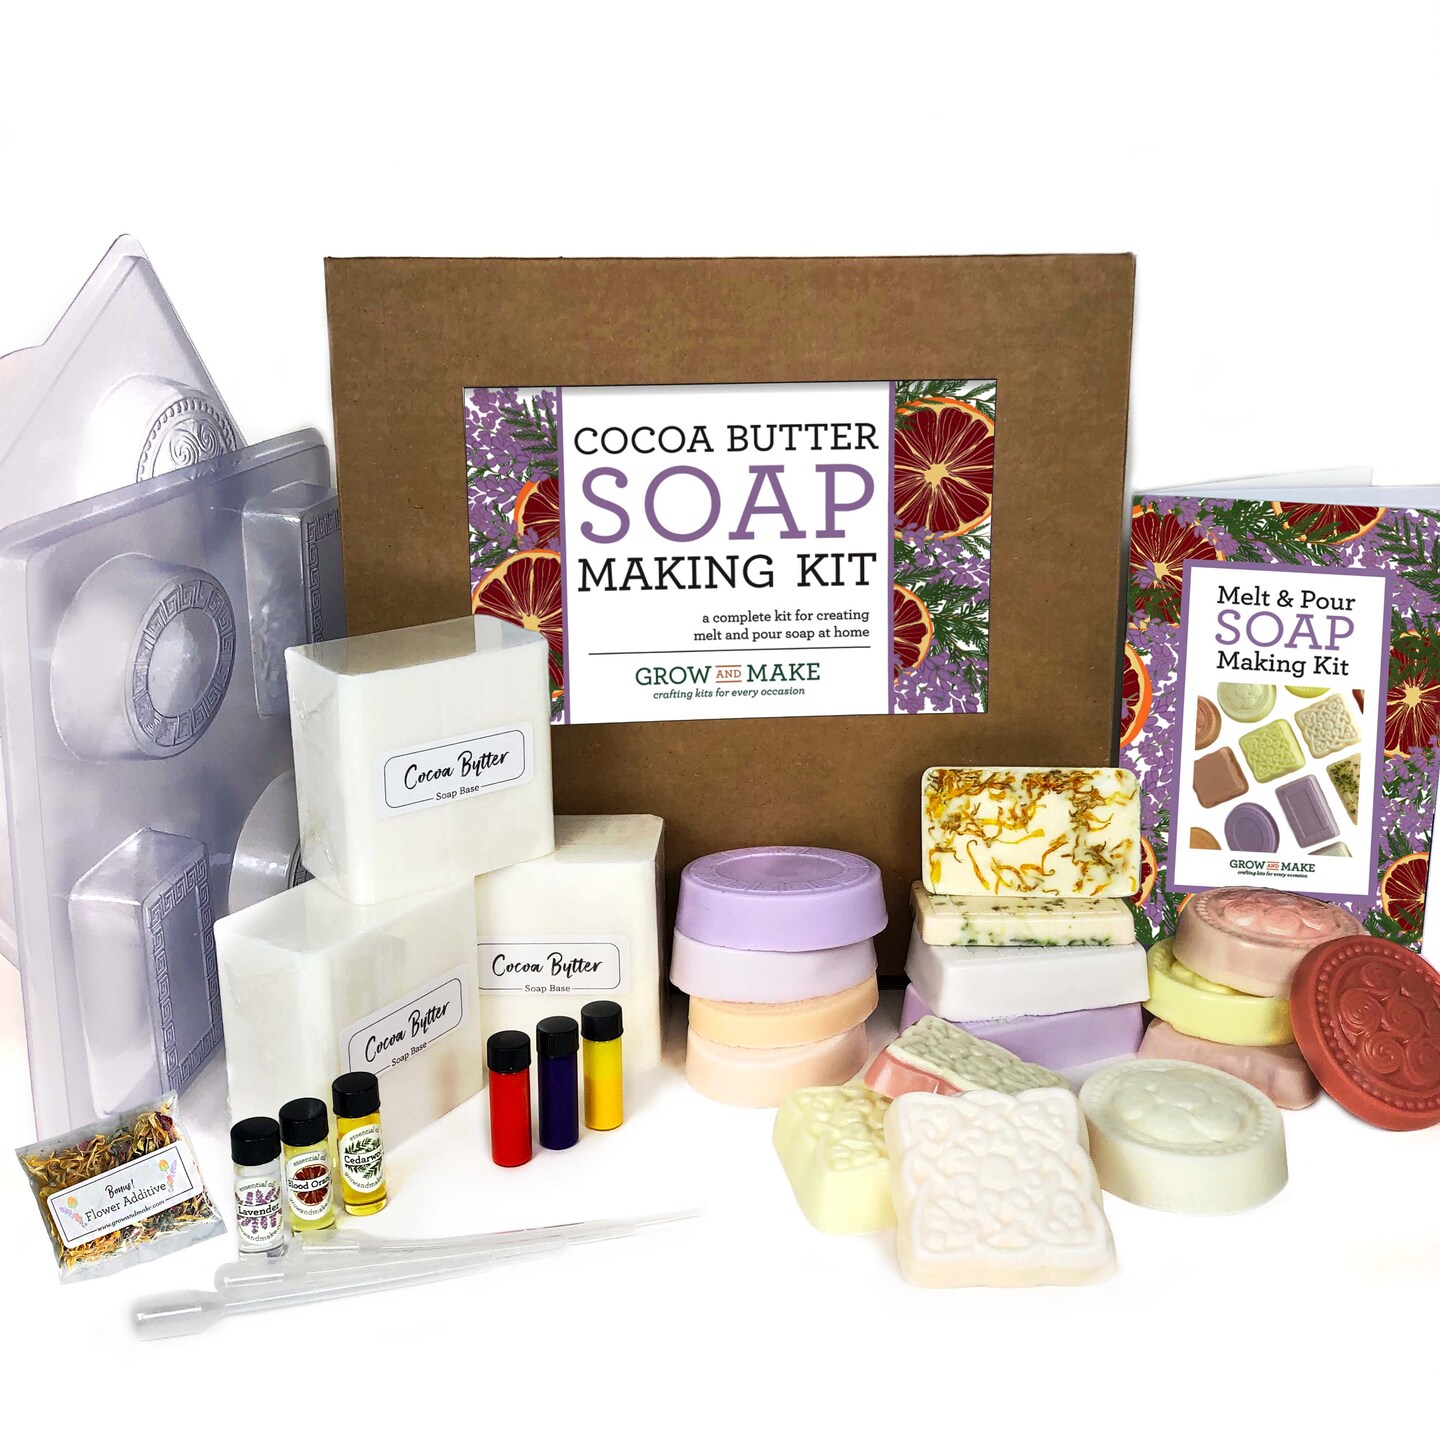 Tassika Handmade Soap Making Kit Supplies, DIY Melt & Pour Soap Making Kit for Adults: Includes 2lbs Soap Base, Dried Flowers, Pigment, Silicon Mold